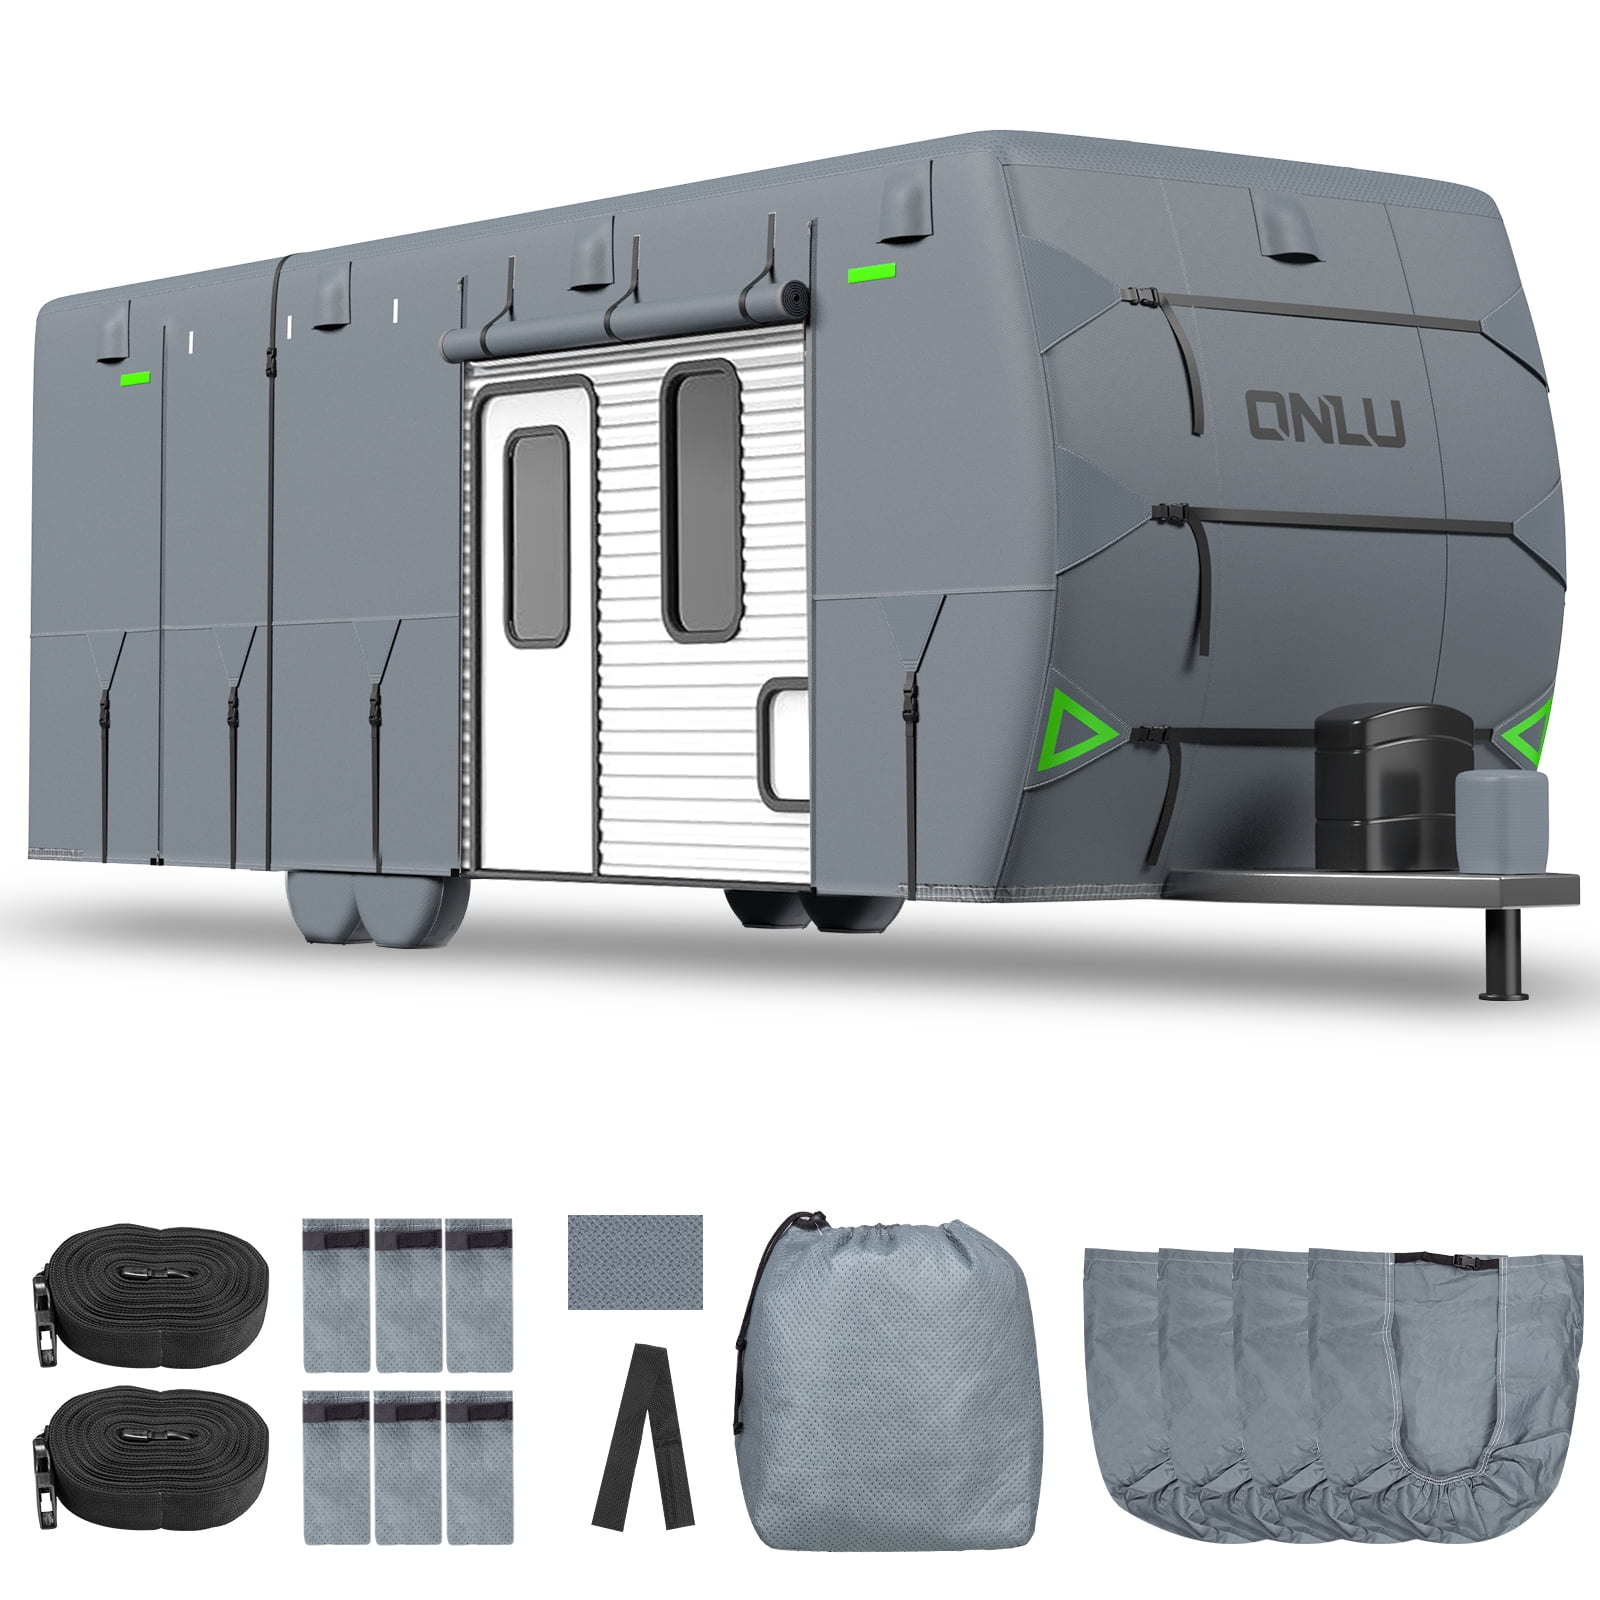 ONLU Extra-Thick 7 Layers Travel Trailer RV Cover Anti-UV Top Panel, Durable  Camper Cover, Fits 33'-35' Motorhome -Breathable, Waterproof, Rip-Stop 